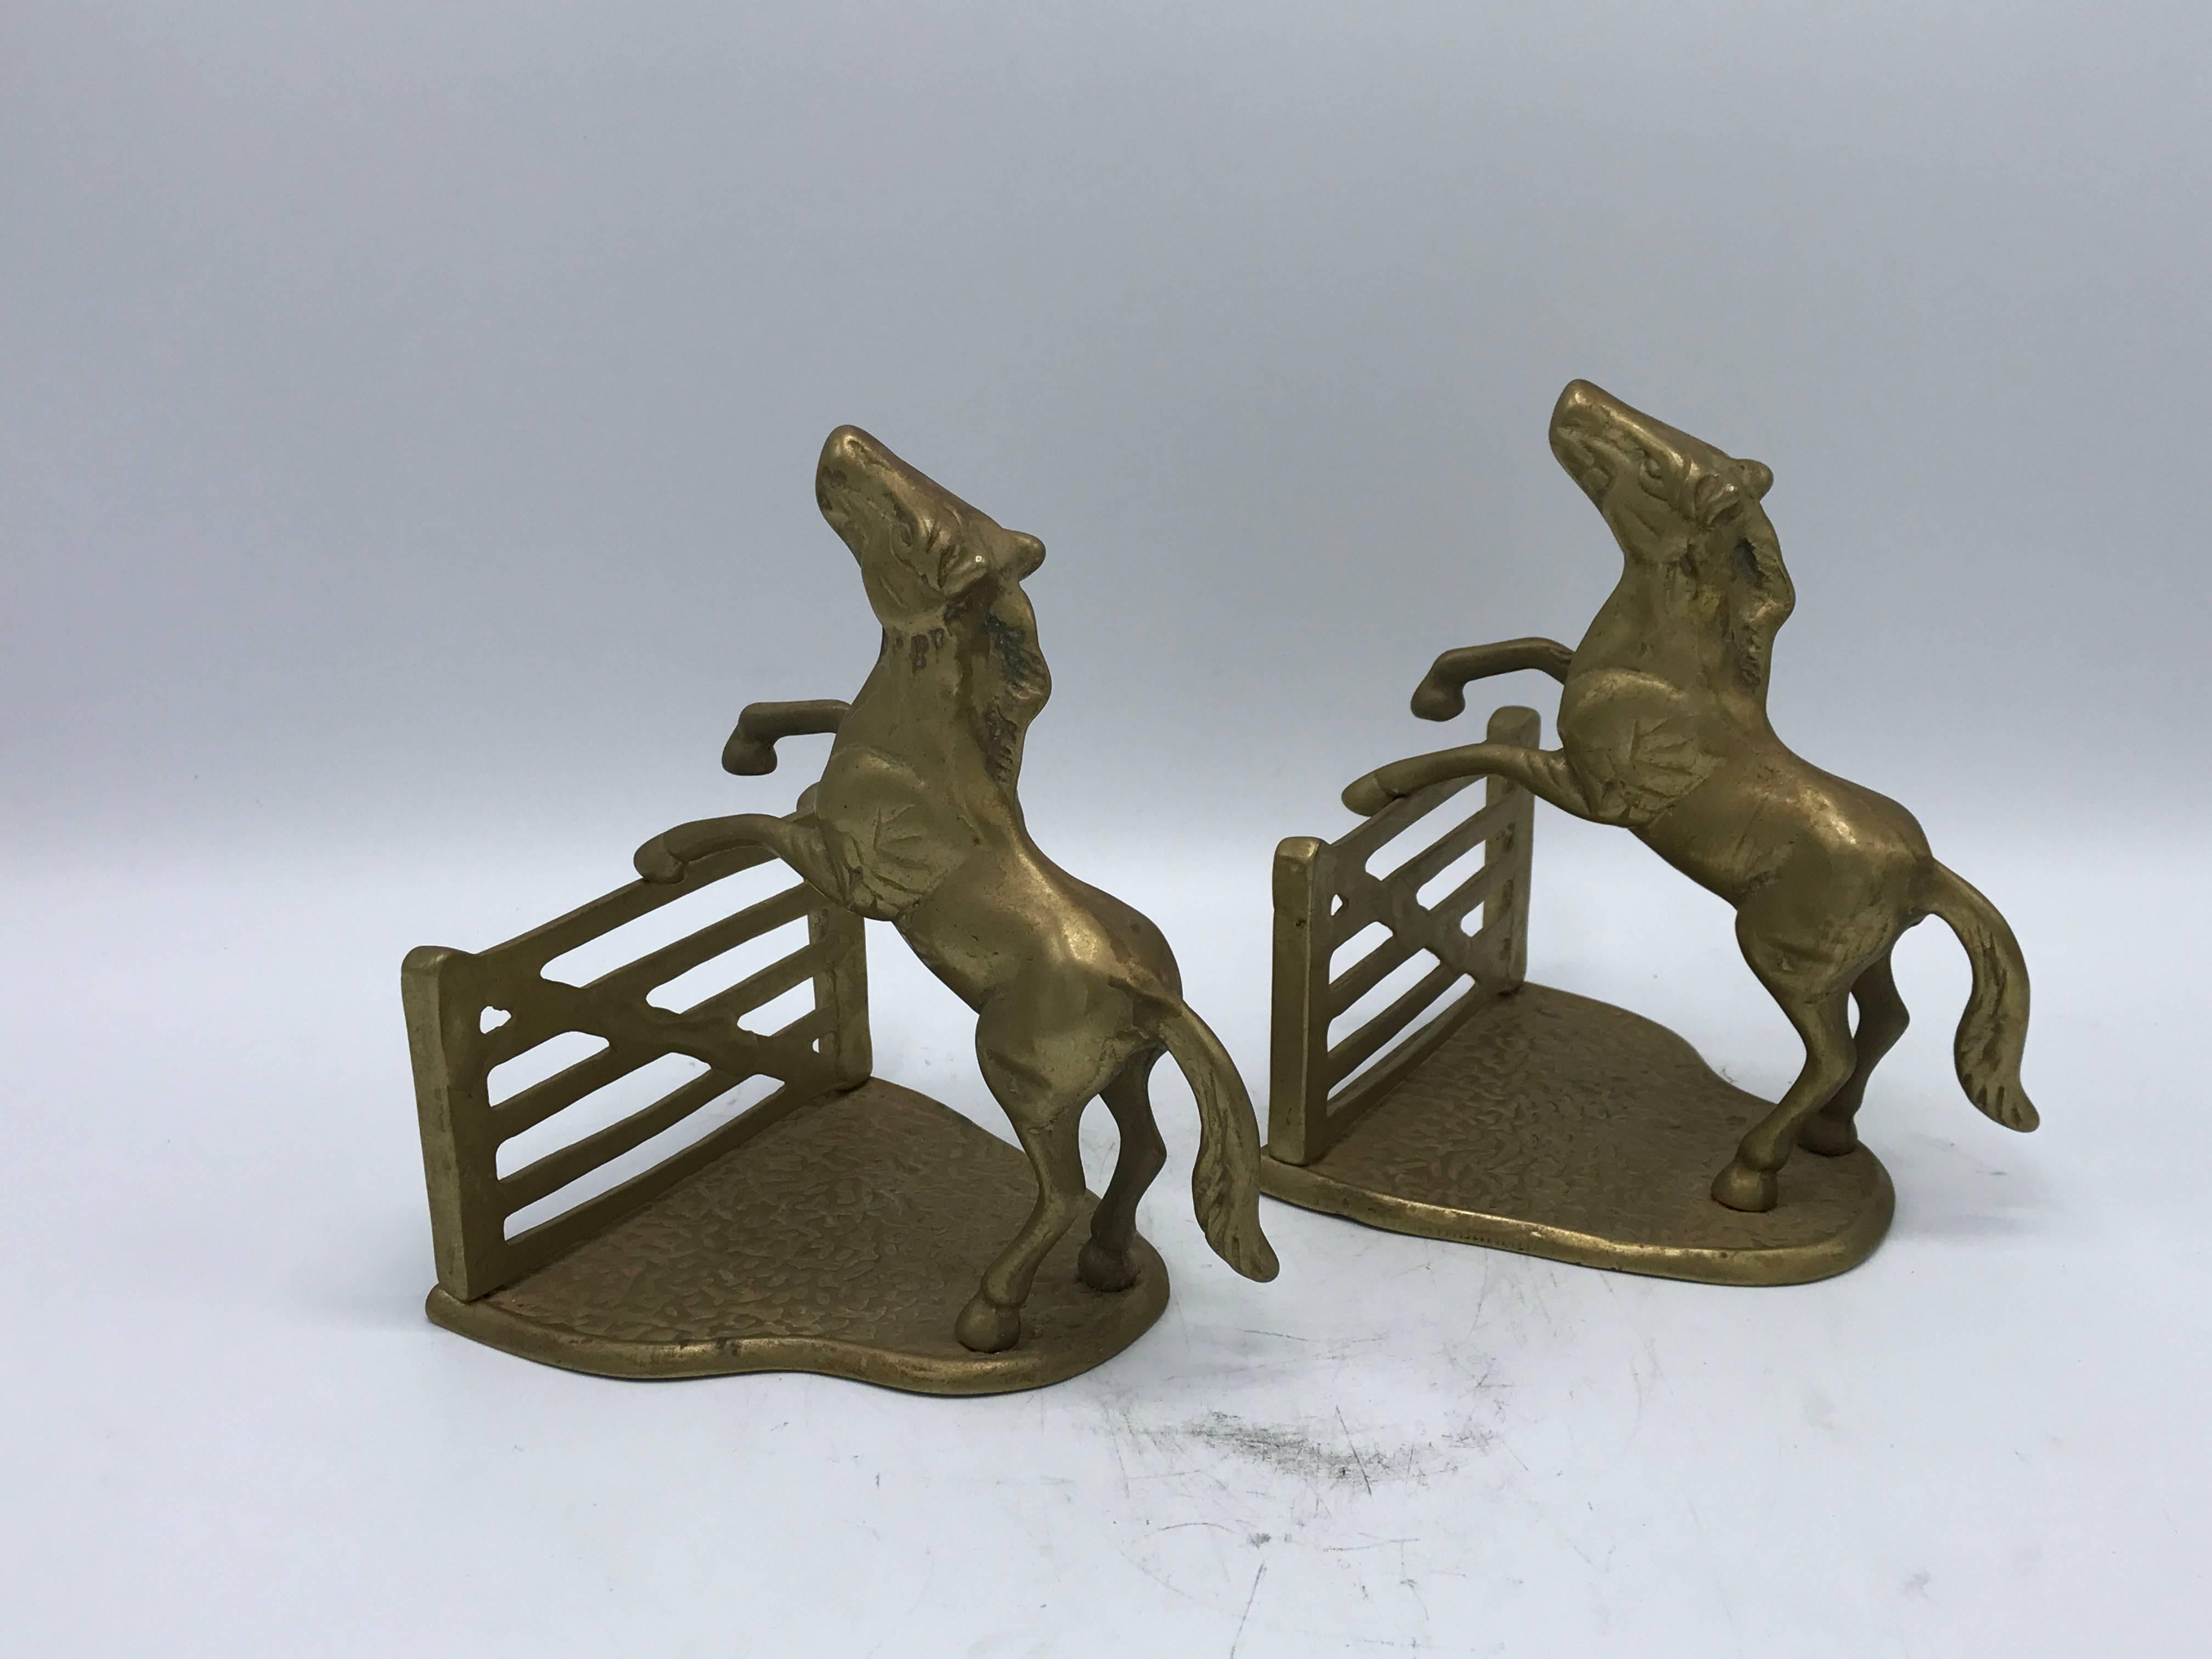 Offered is a beautiful pair of 1970s solid-brass horse sculpture bookends. 